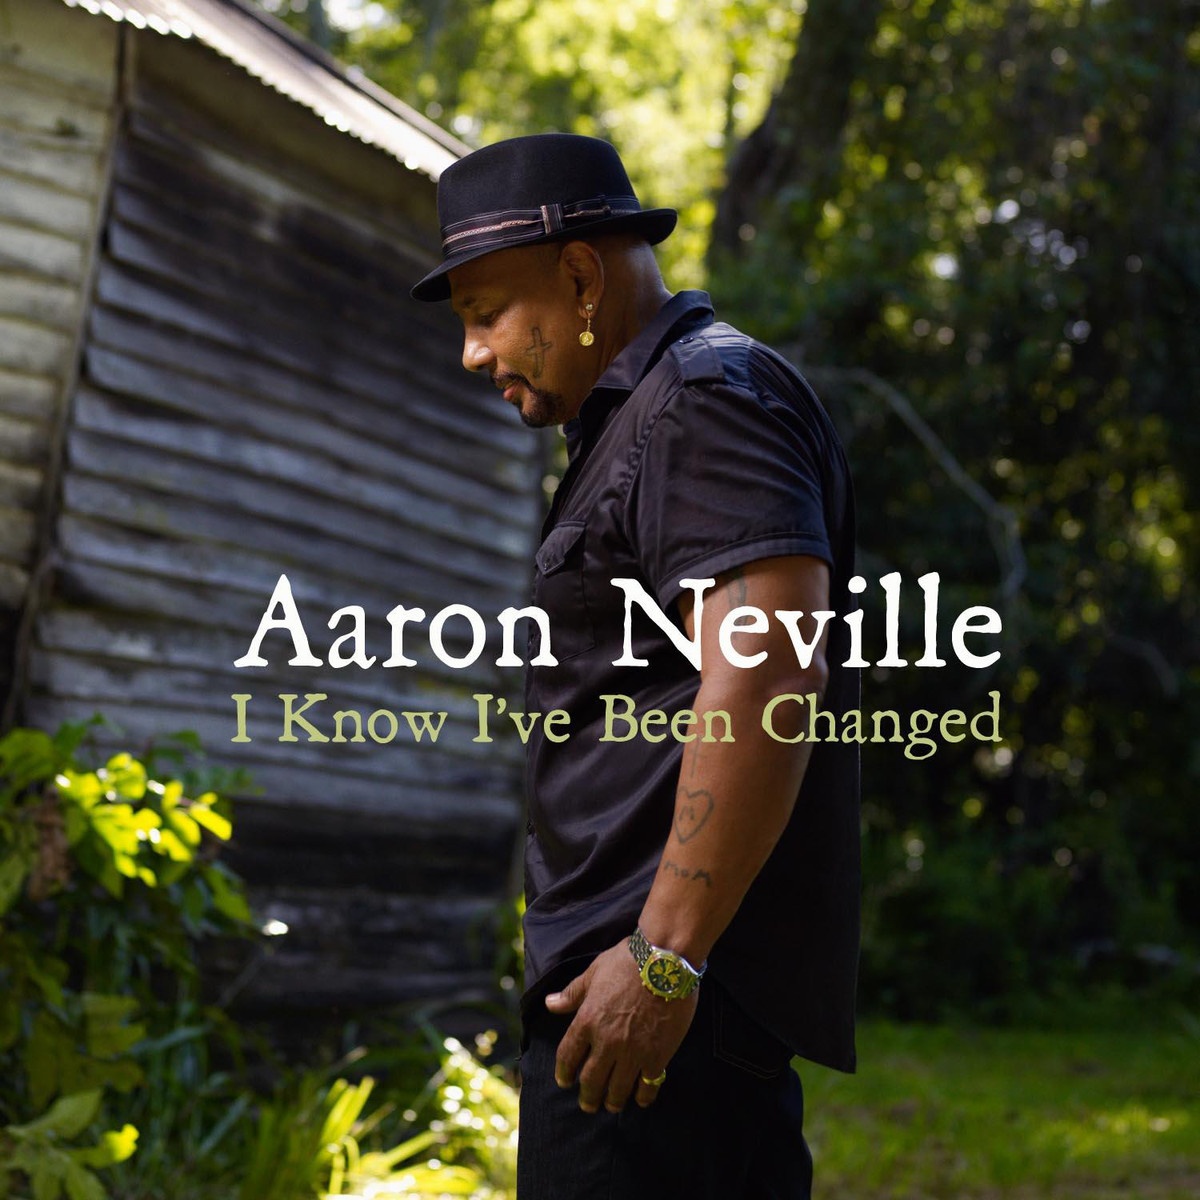 I ve been offered. Aaron Neville. Aaron Neville be your man. Aaron Neville over. I know.